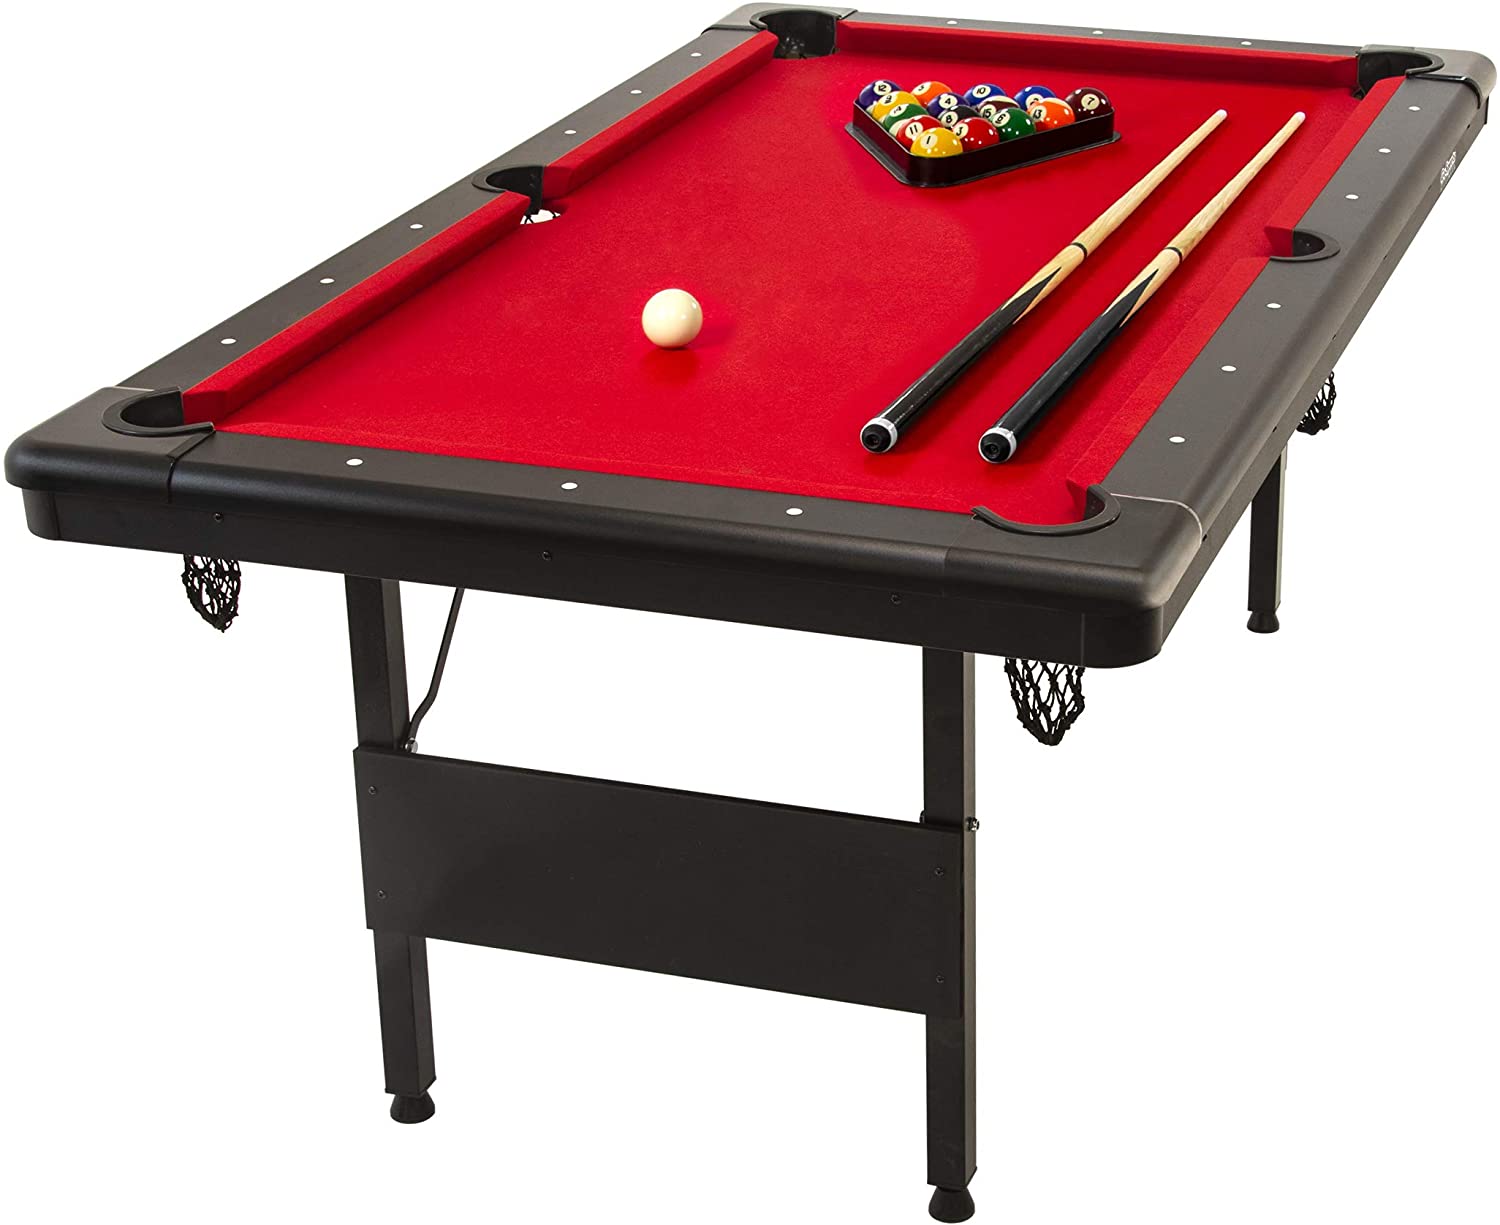 7 Best Portable Pool Tables (May 2022) — Reviews & Buying Guide﻿